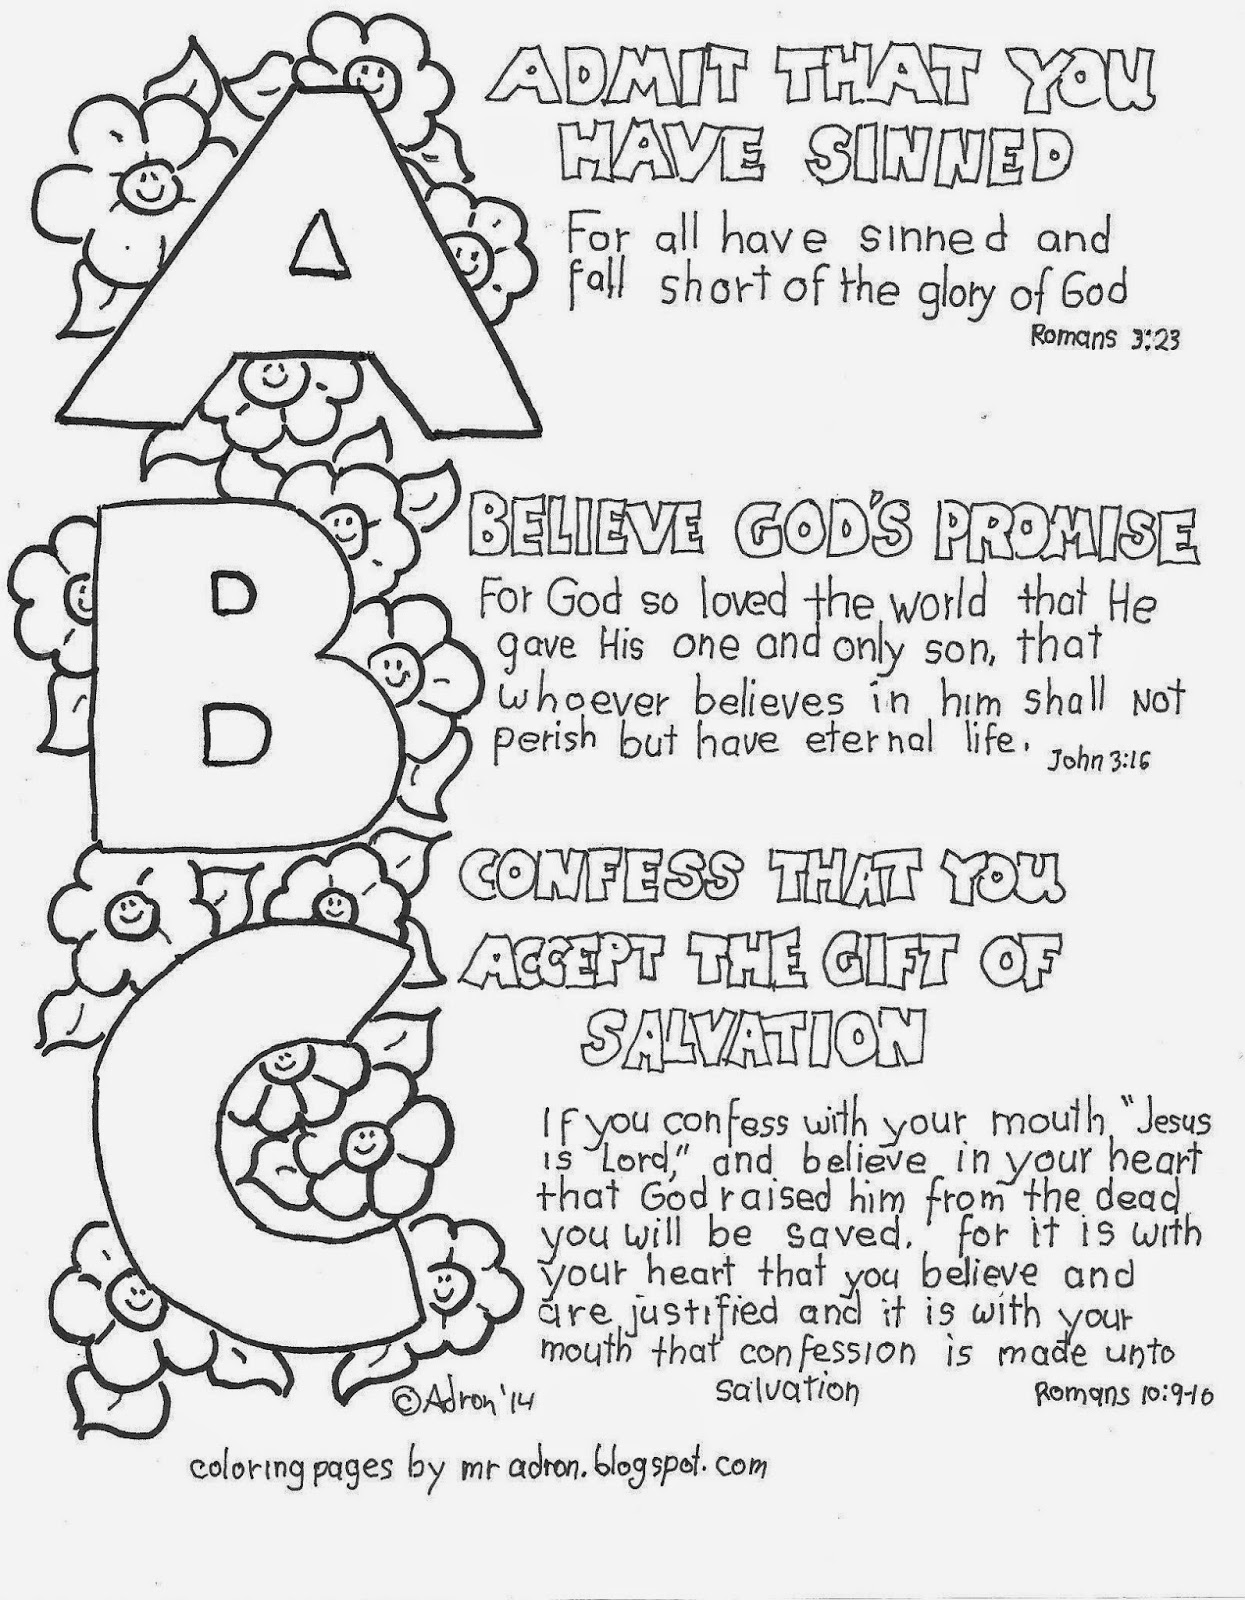 Plan Of Salvation Coloring Page At GetColorings Free Printable Colorings Pages To Print